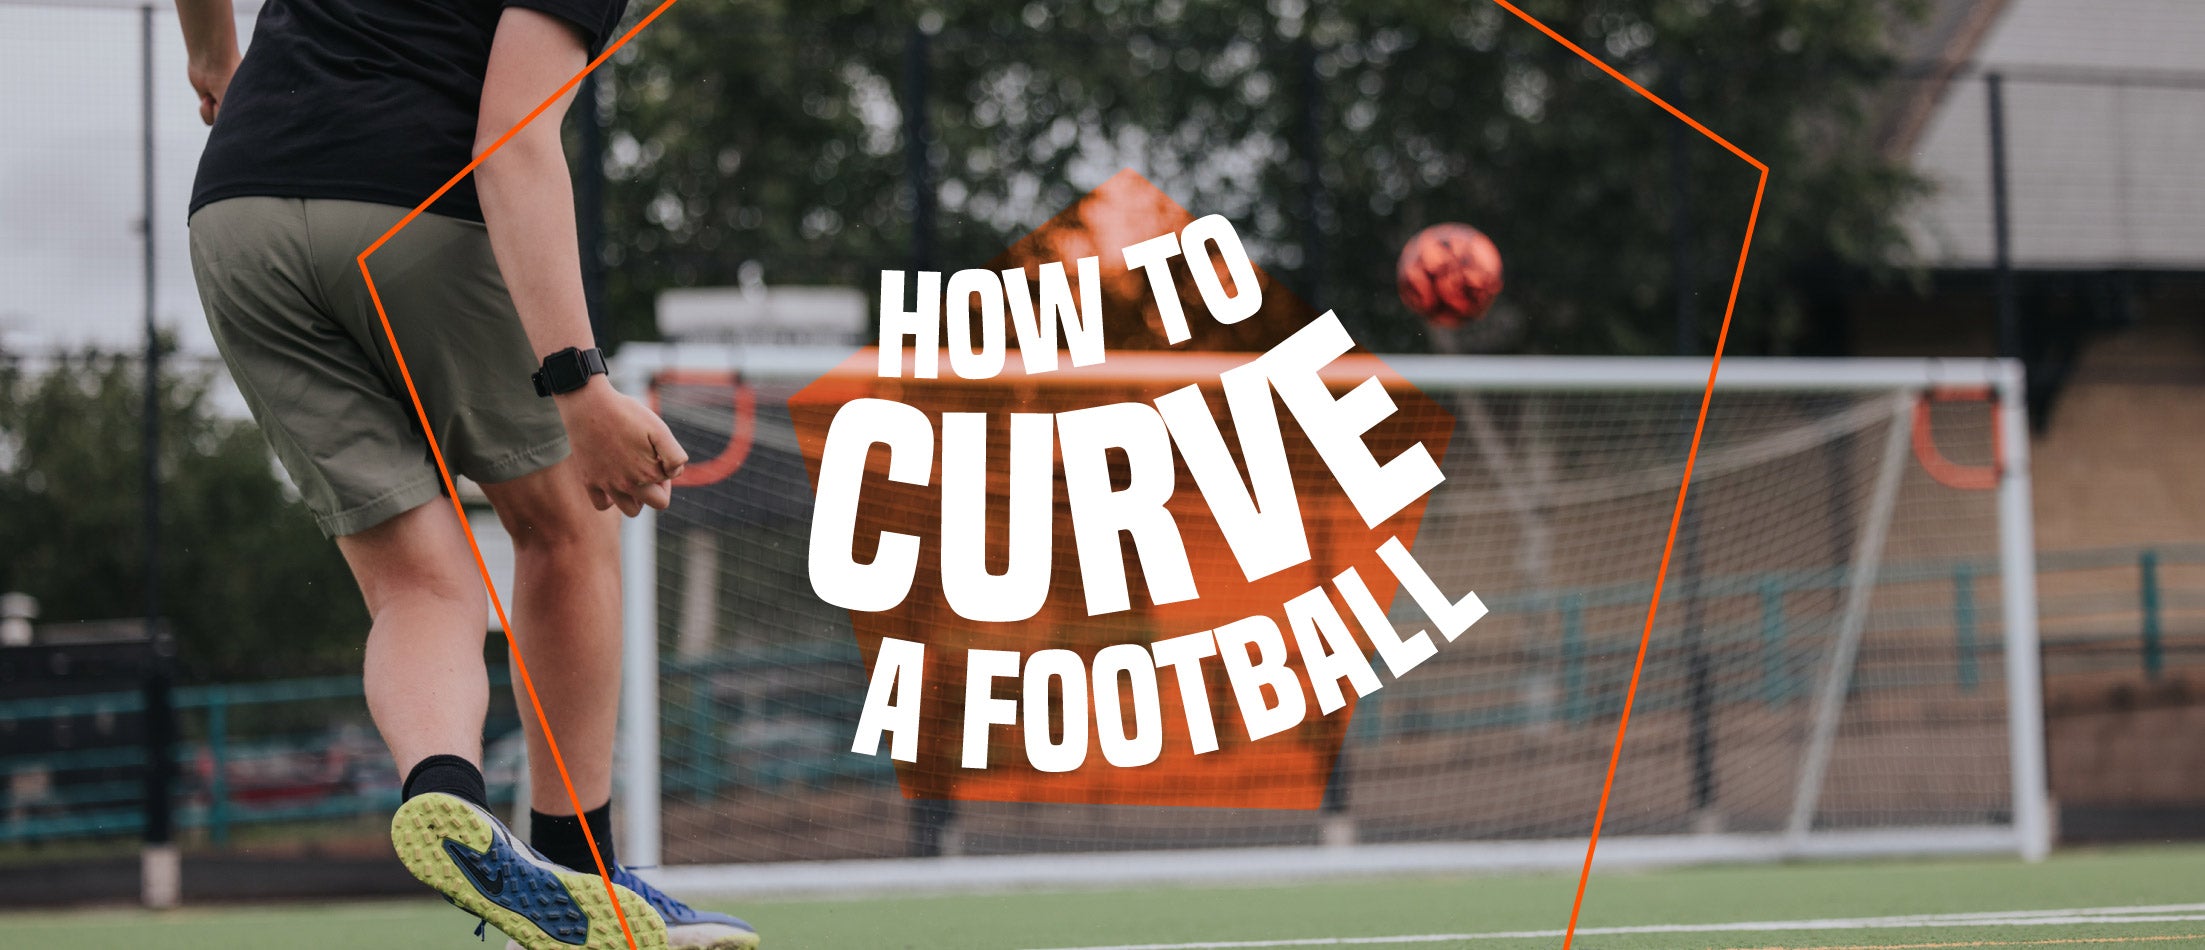 A Guide to Adding Swerve to Your Soccer Skills - How to curve a football